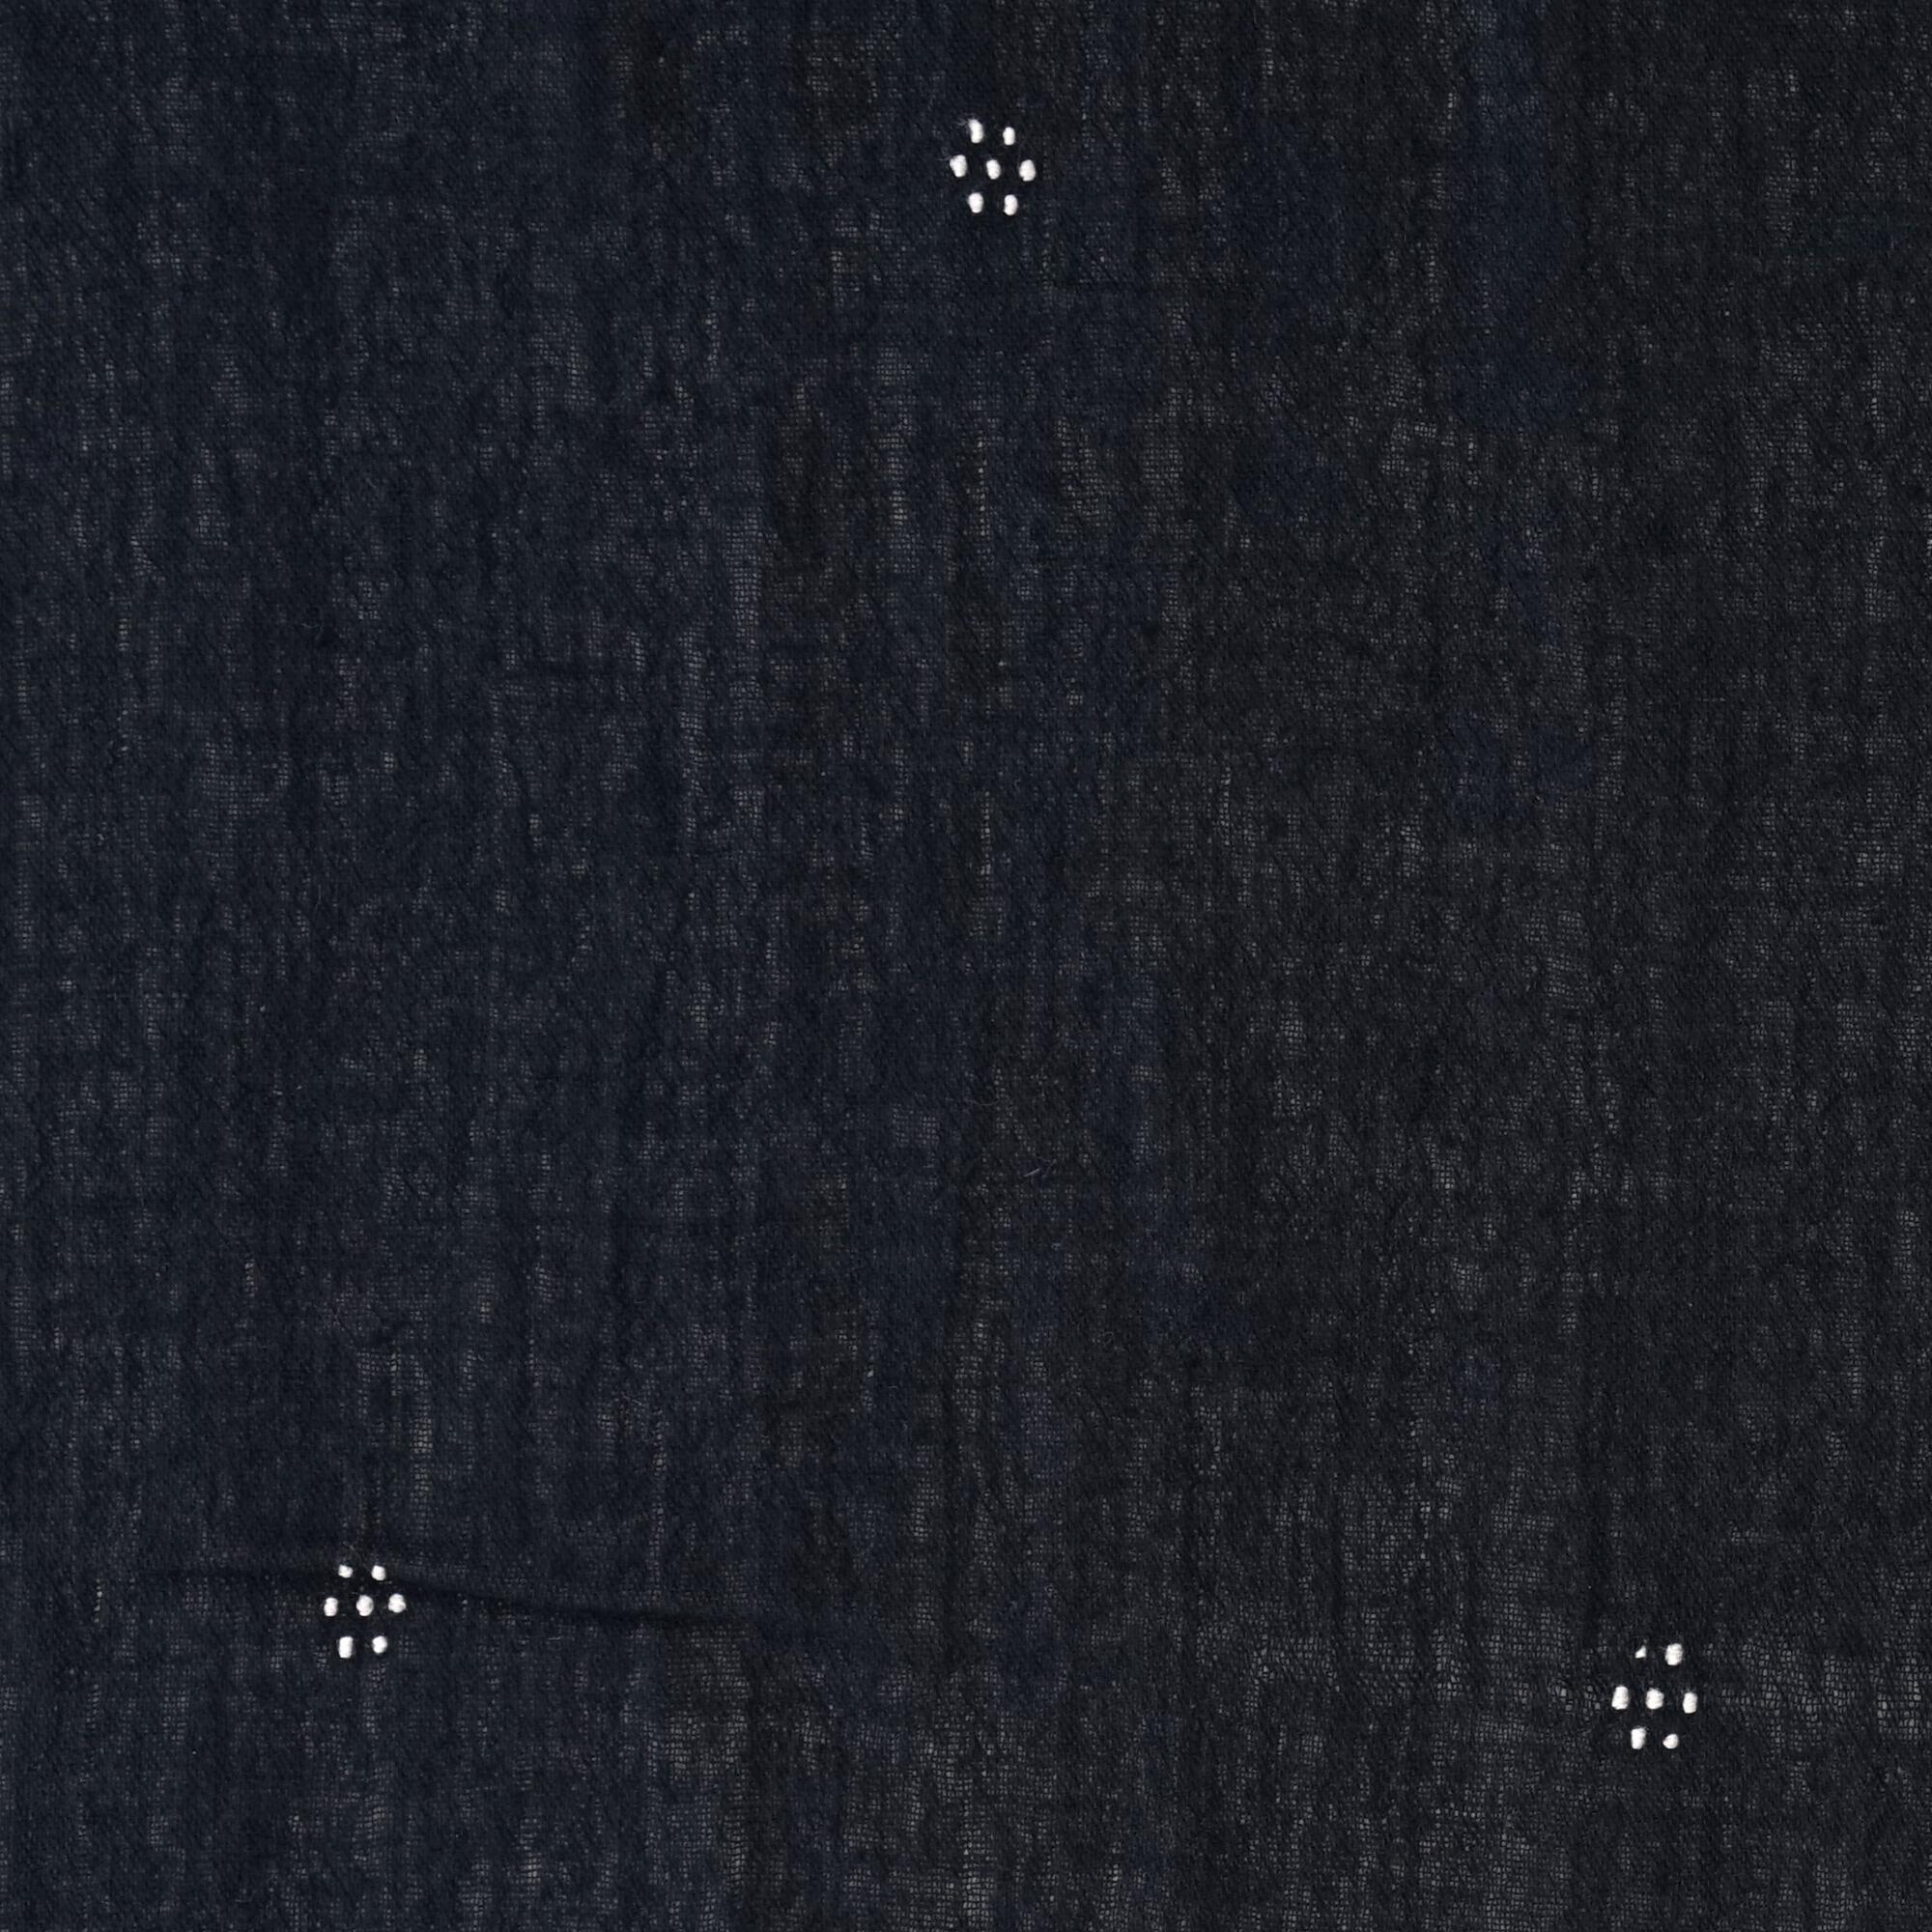 Handloom-Woven Organic Kala Cotton Fabric from India - Plain 1 by 1 Weave With Extra Knotted Weft - Tangalia Design - Black Reactive Dye - Flat